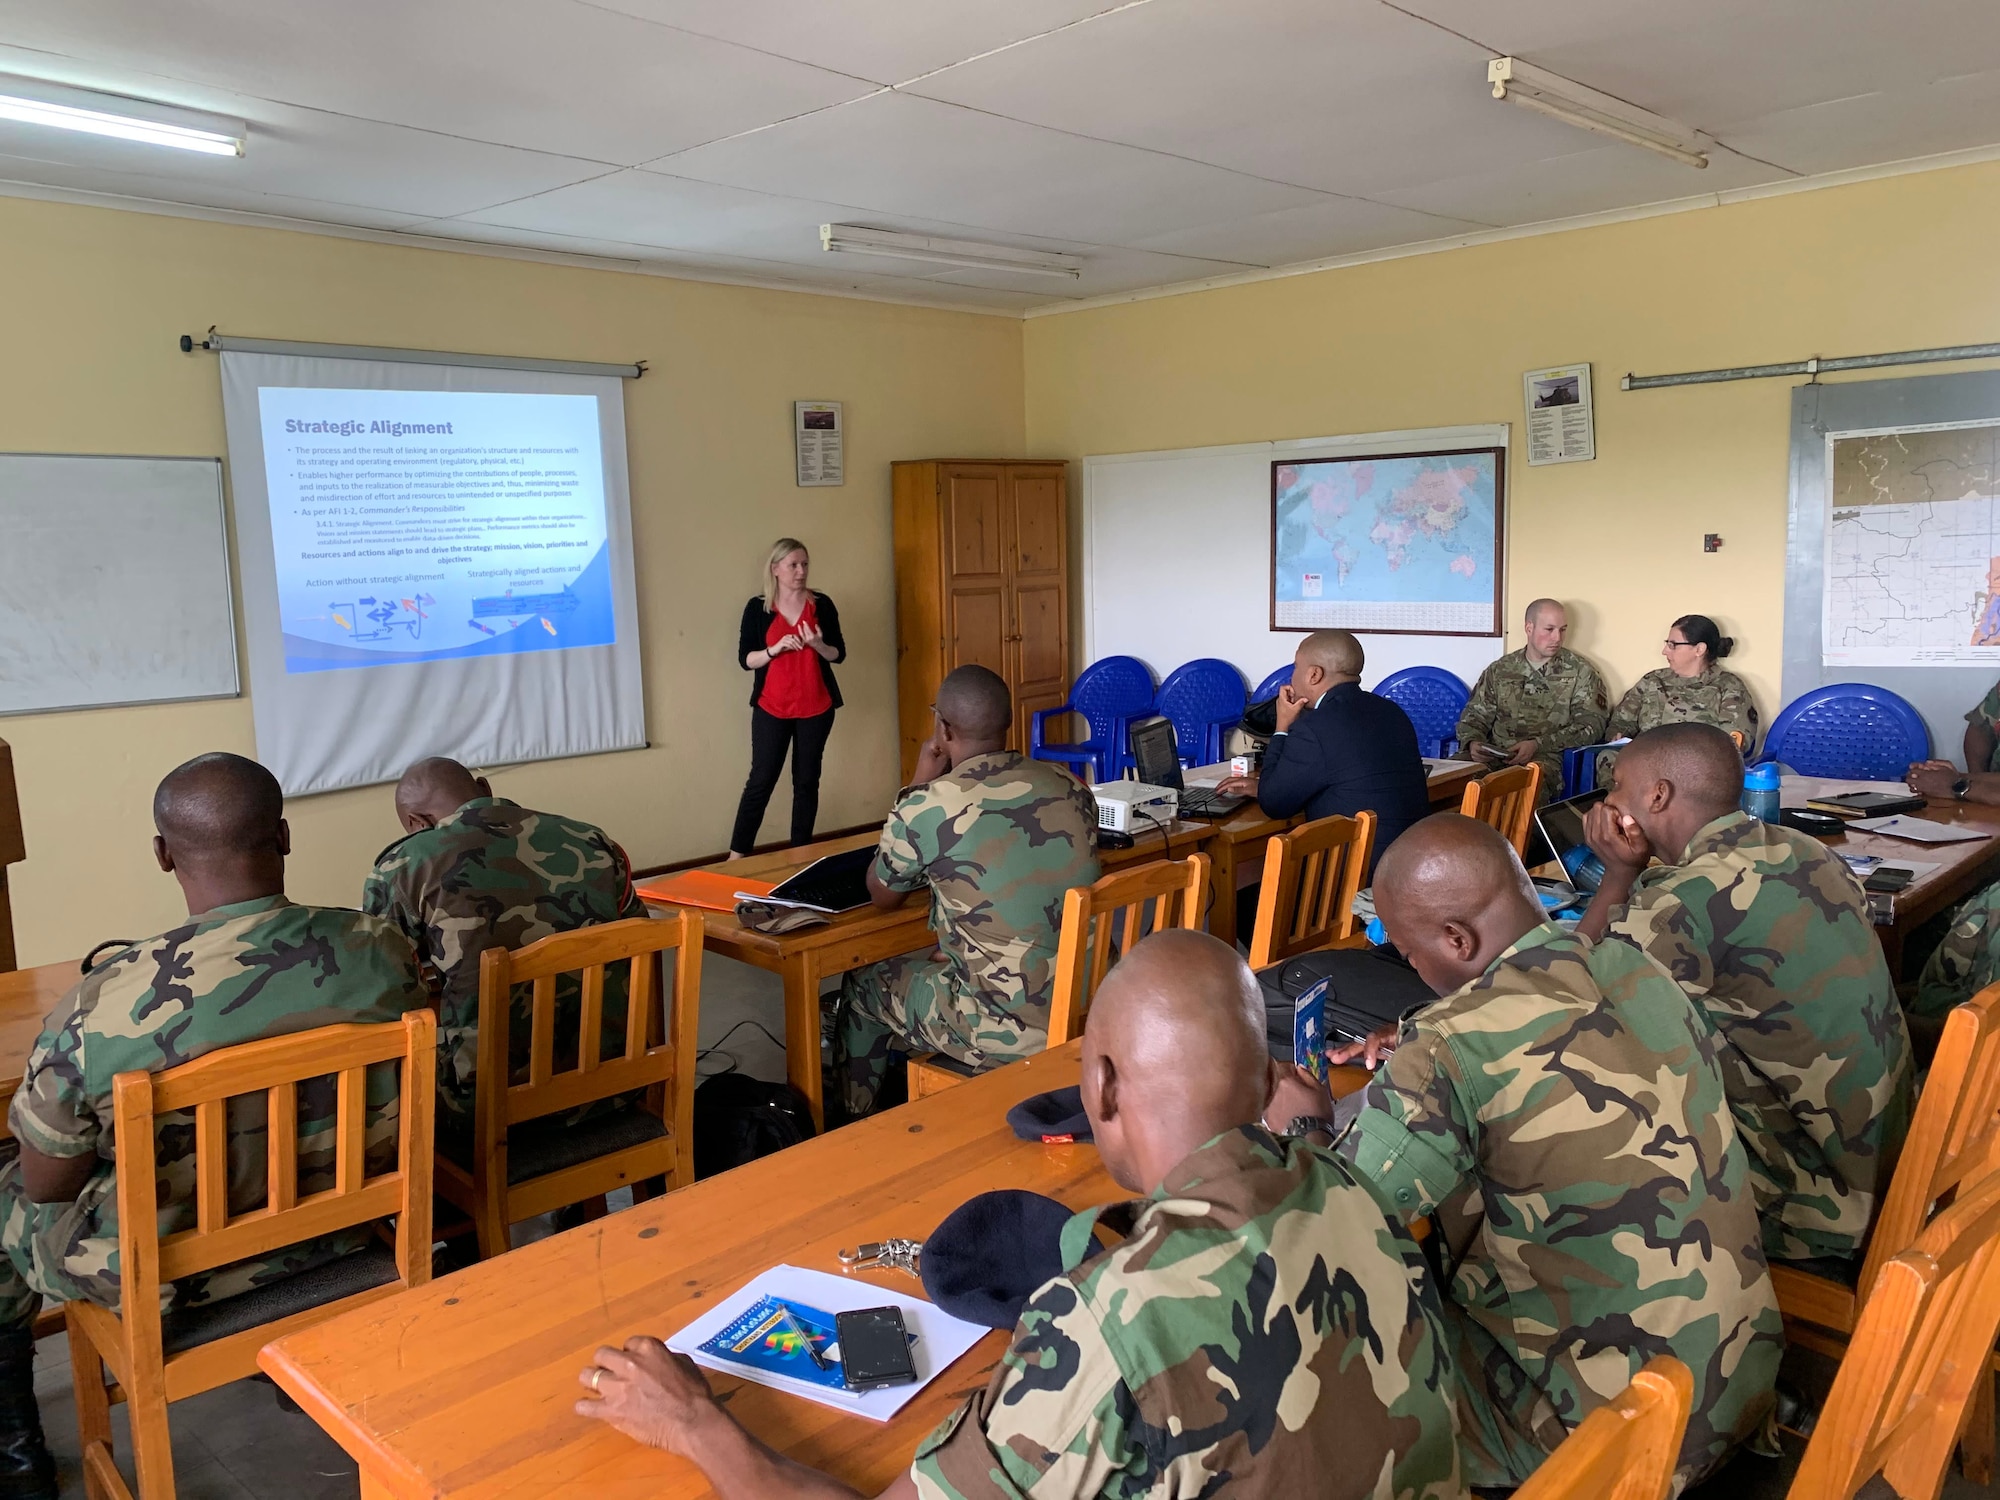 Lydia Bradley, U.S. Air Forces in Europe and Air Forces Africa Manpower, Personnel and Services Directorate, Force Development team, briefs continuous process improvement to members of the Malawian air force at Lilongwe Air Base, Malawi, Jan. 14, 2020. Bradley is part of a force development team that has been working with the Malawian air force since 2018 to build partnership capacity in the region. (U.S. Air Force photo by Capt. Korey Fratini)